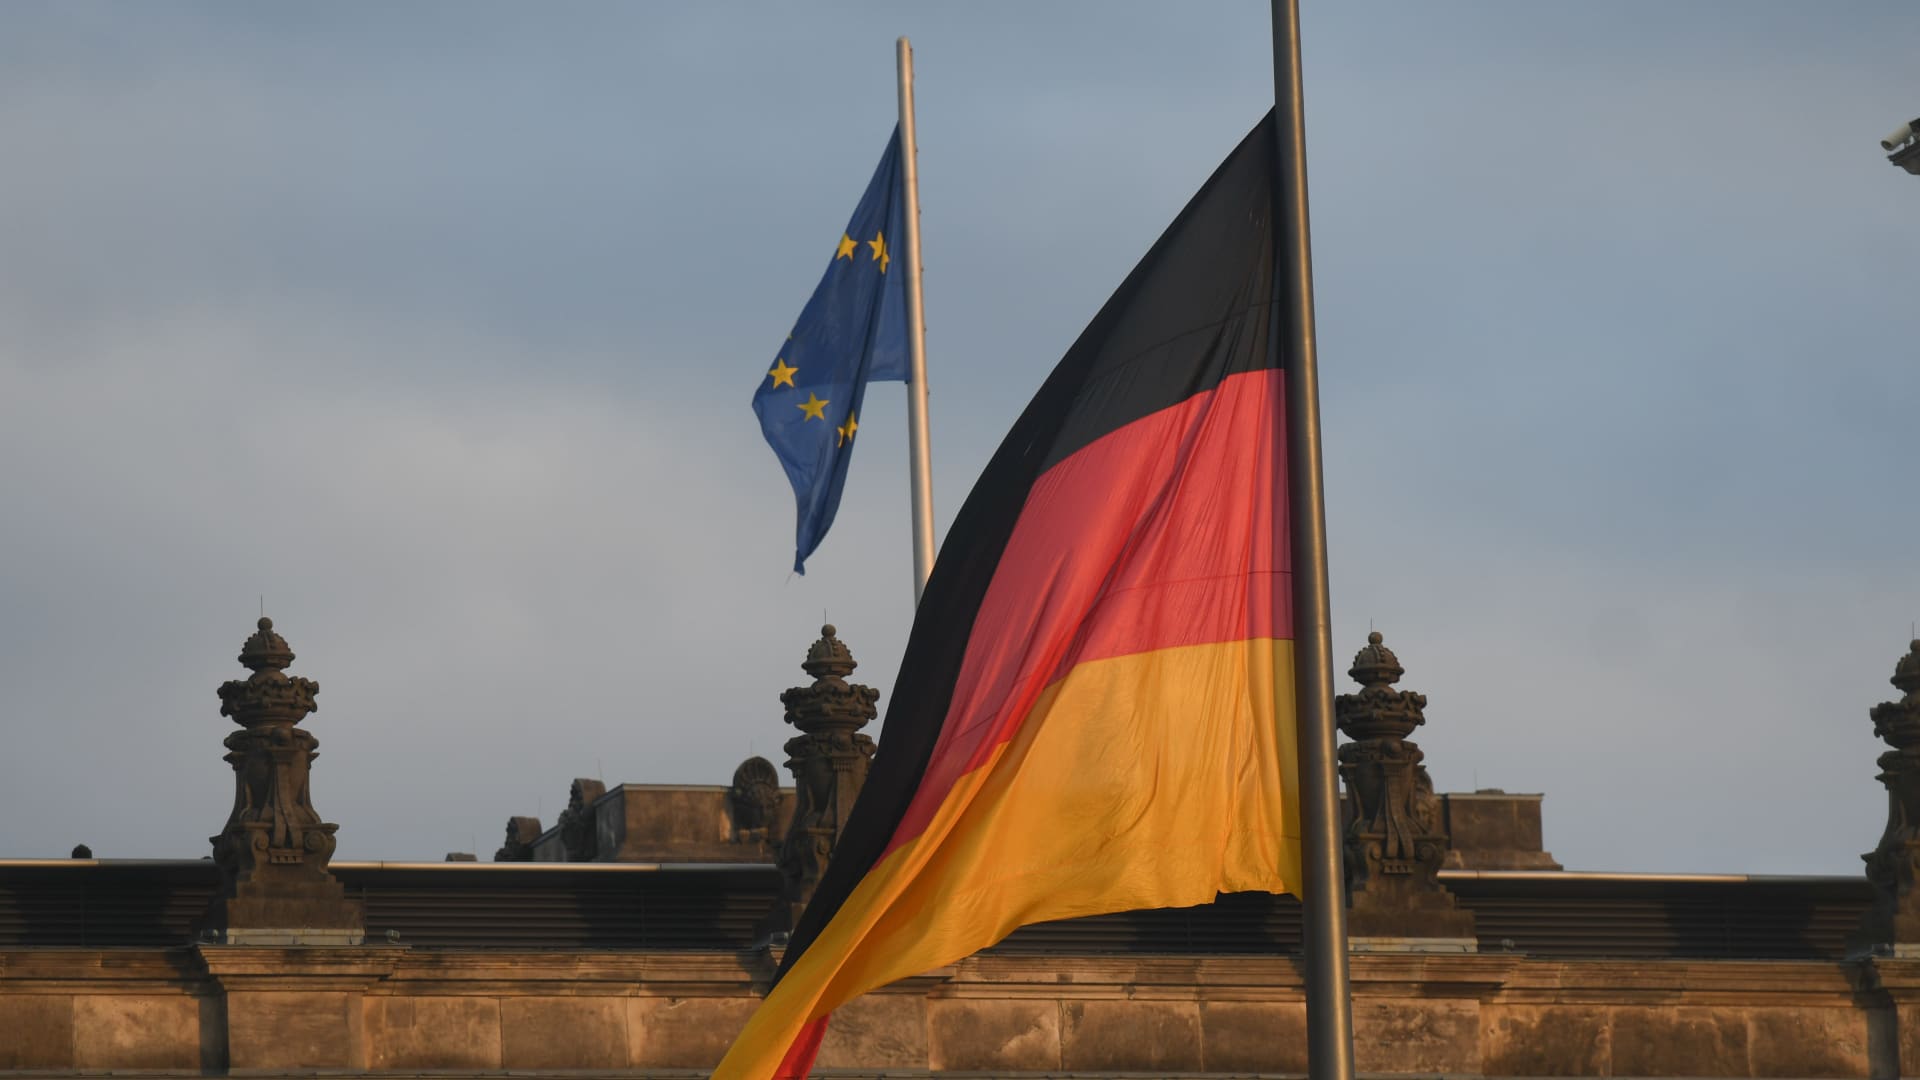 A view of EU and German flags over the Reichstag building, the seat of the German Parliament.